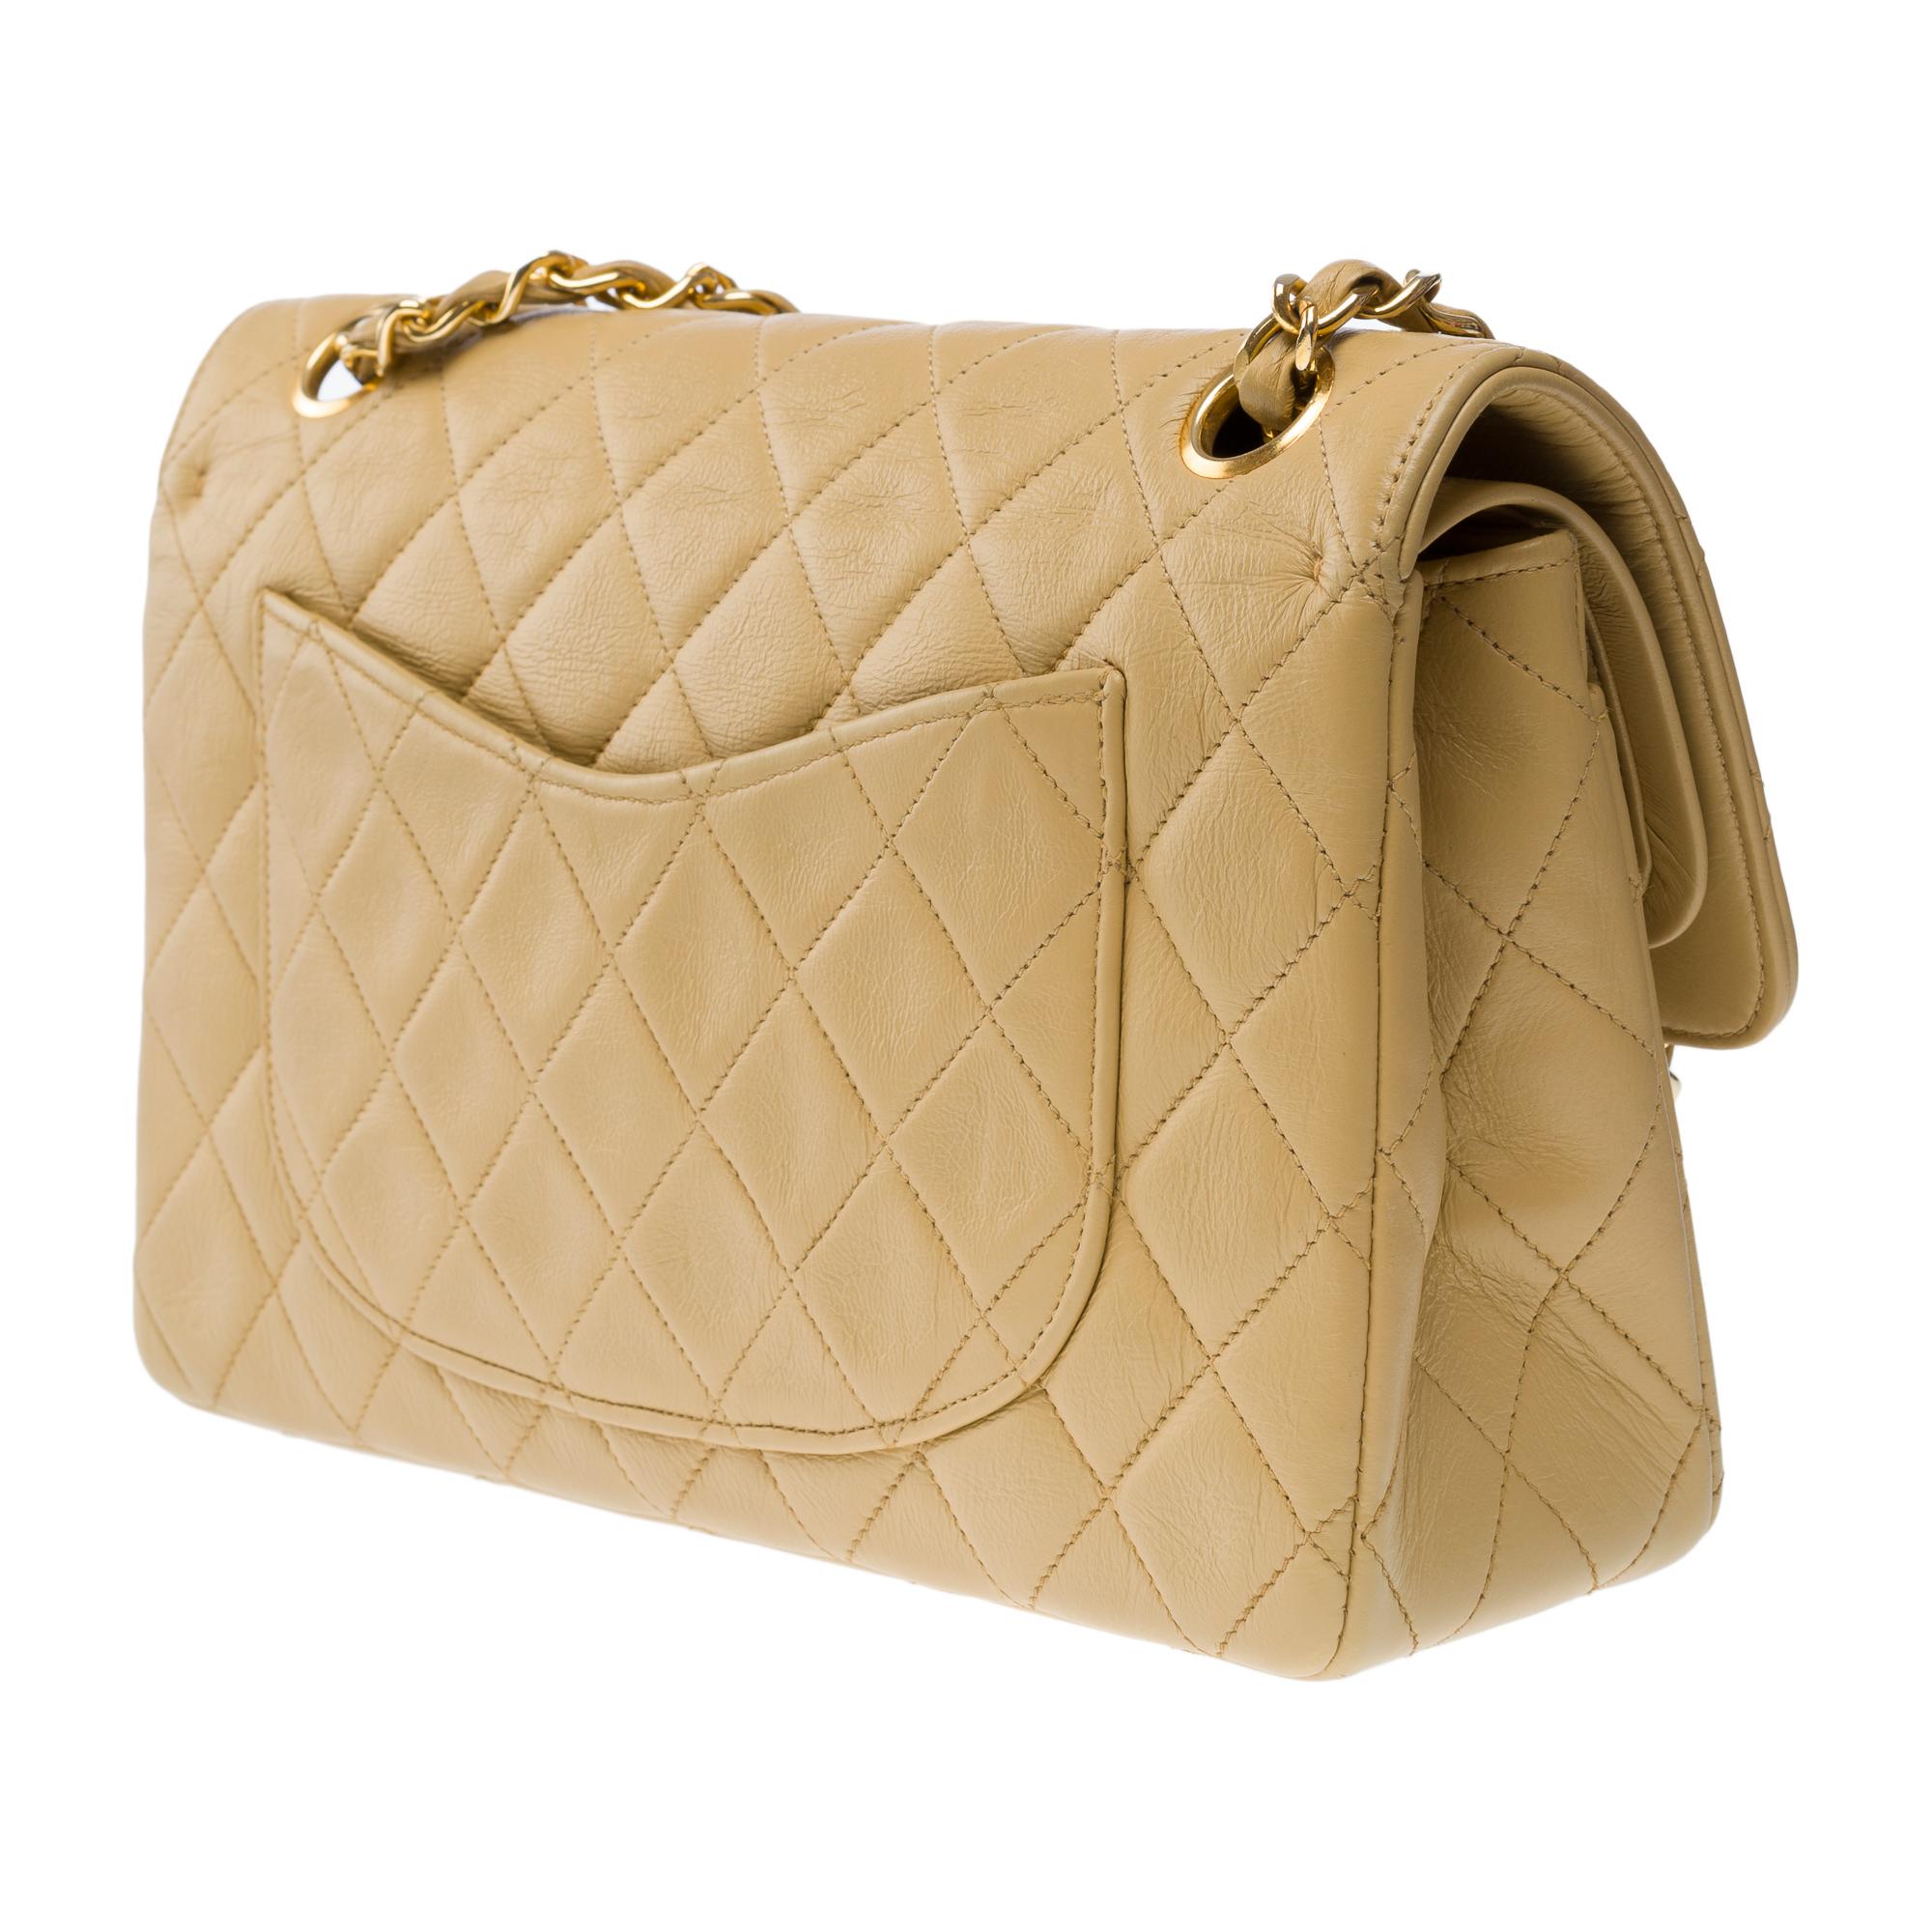 Chanel Timeless 23cm double flap shoulder bag in beige quilted lambskin, GHW For Sale 1